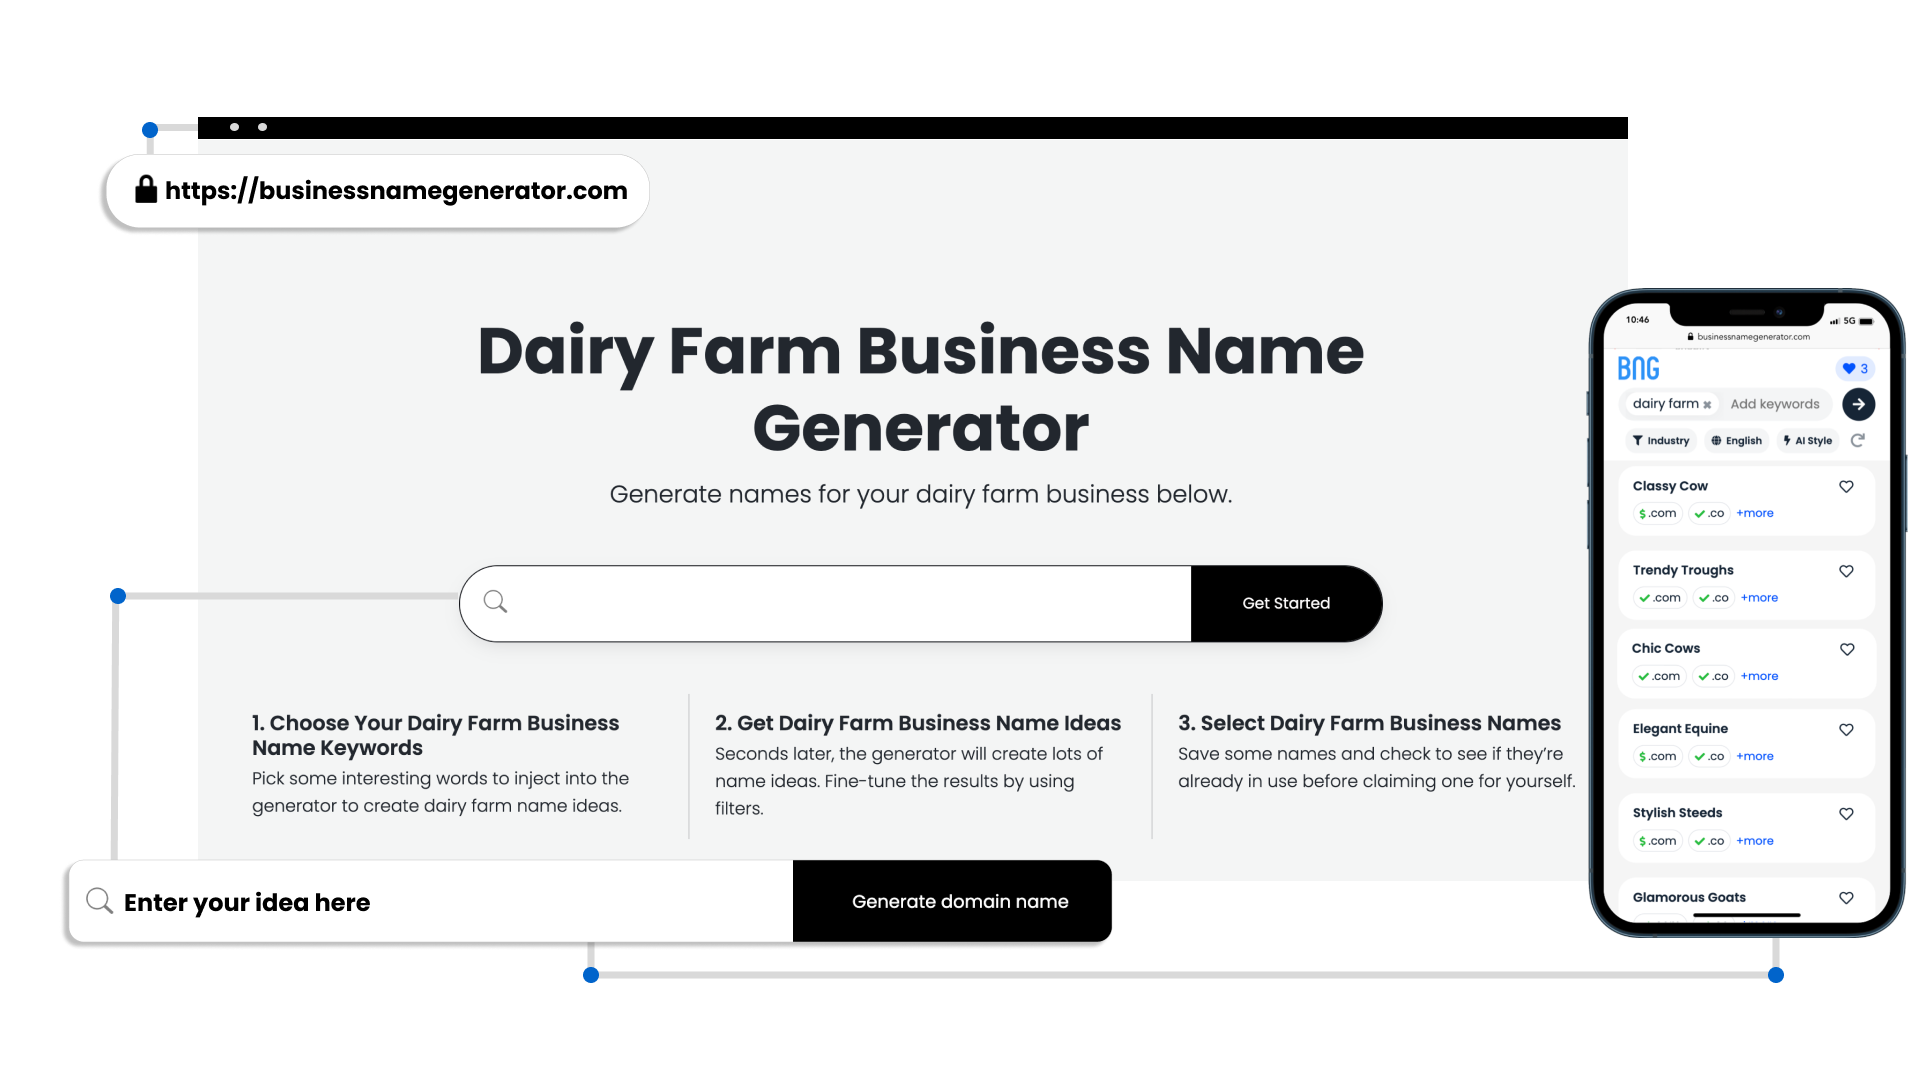 Benefits of Our Dairy Farm Business Name Generator